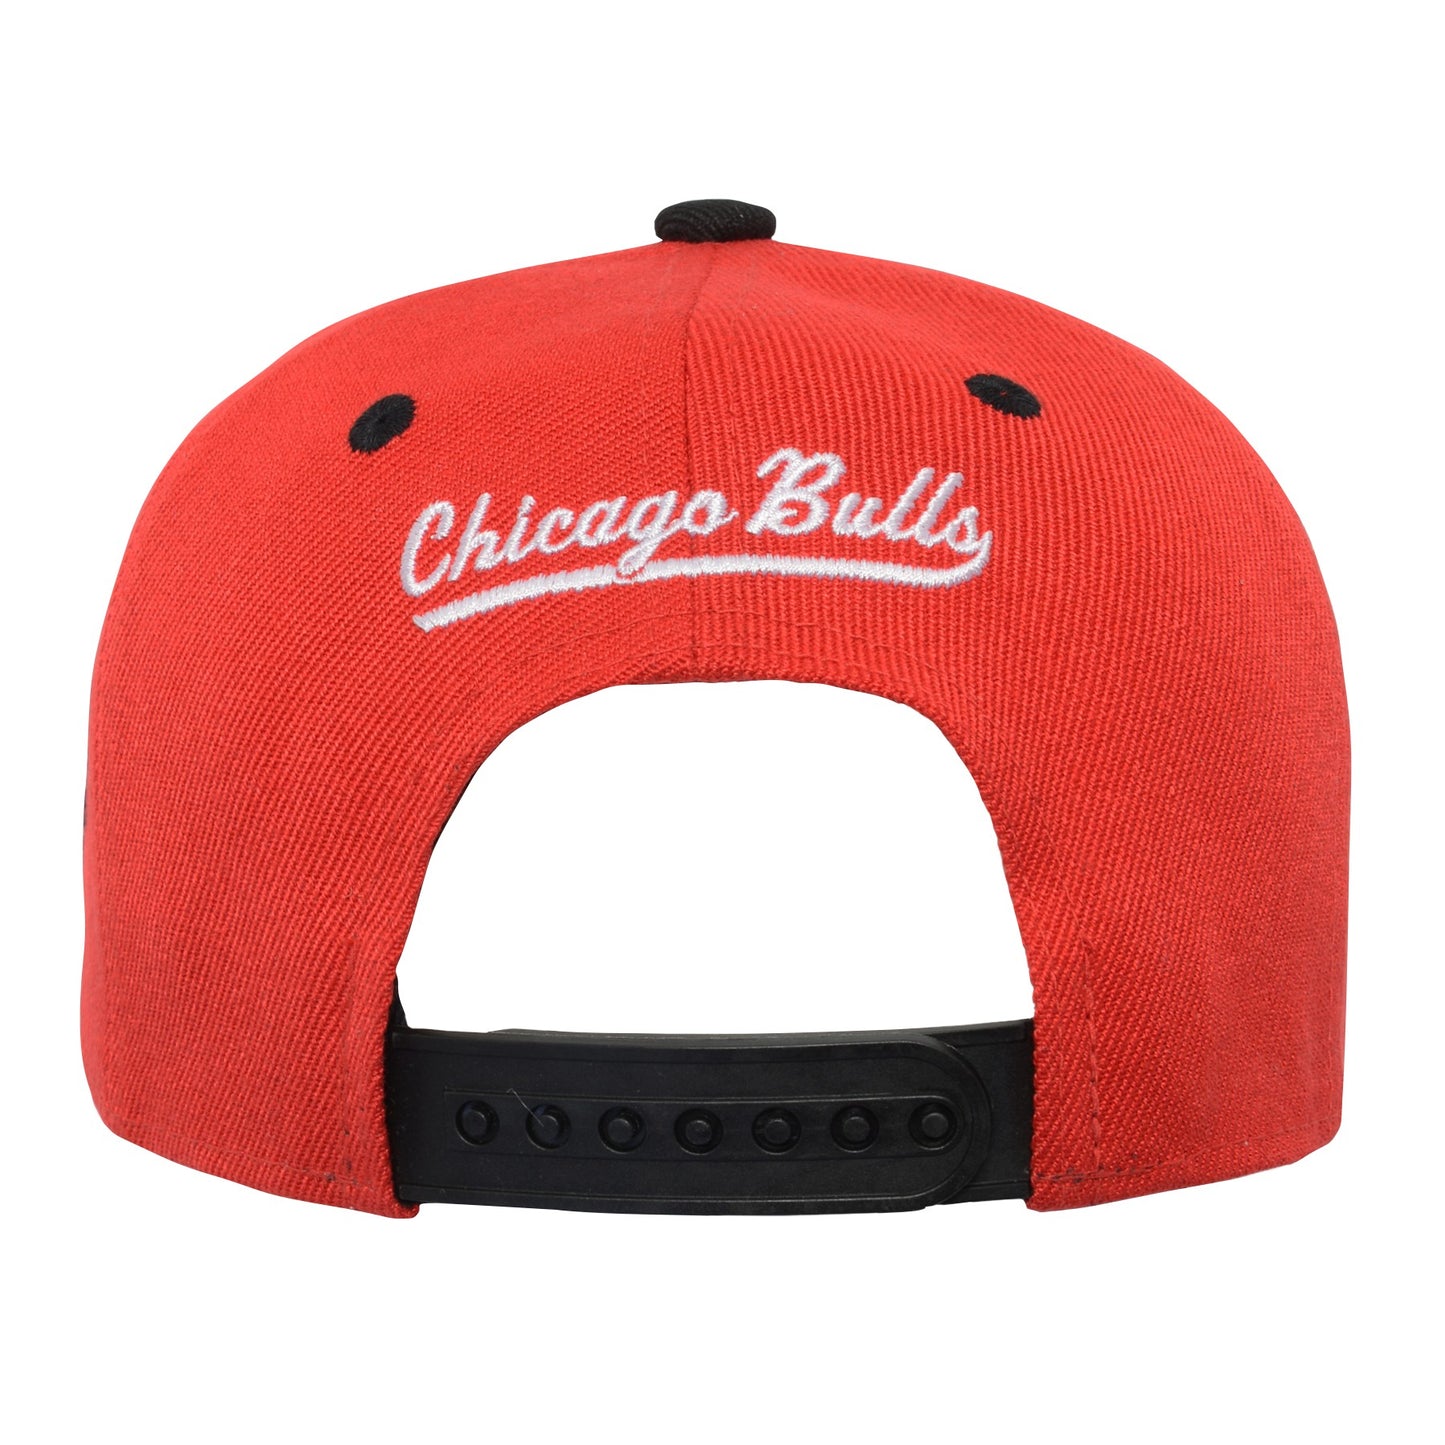 Youth Chicago Bulls NBA Two-Tone Red/Black Retro Script Adjustable Hat